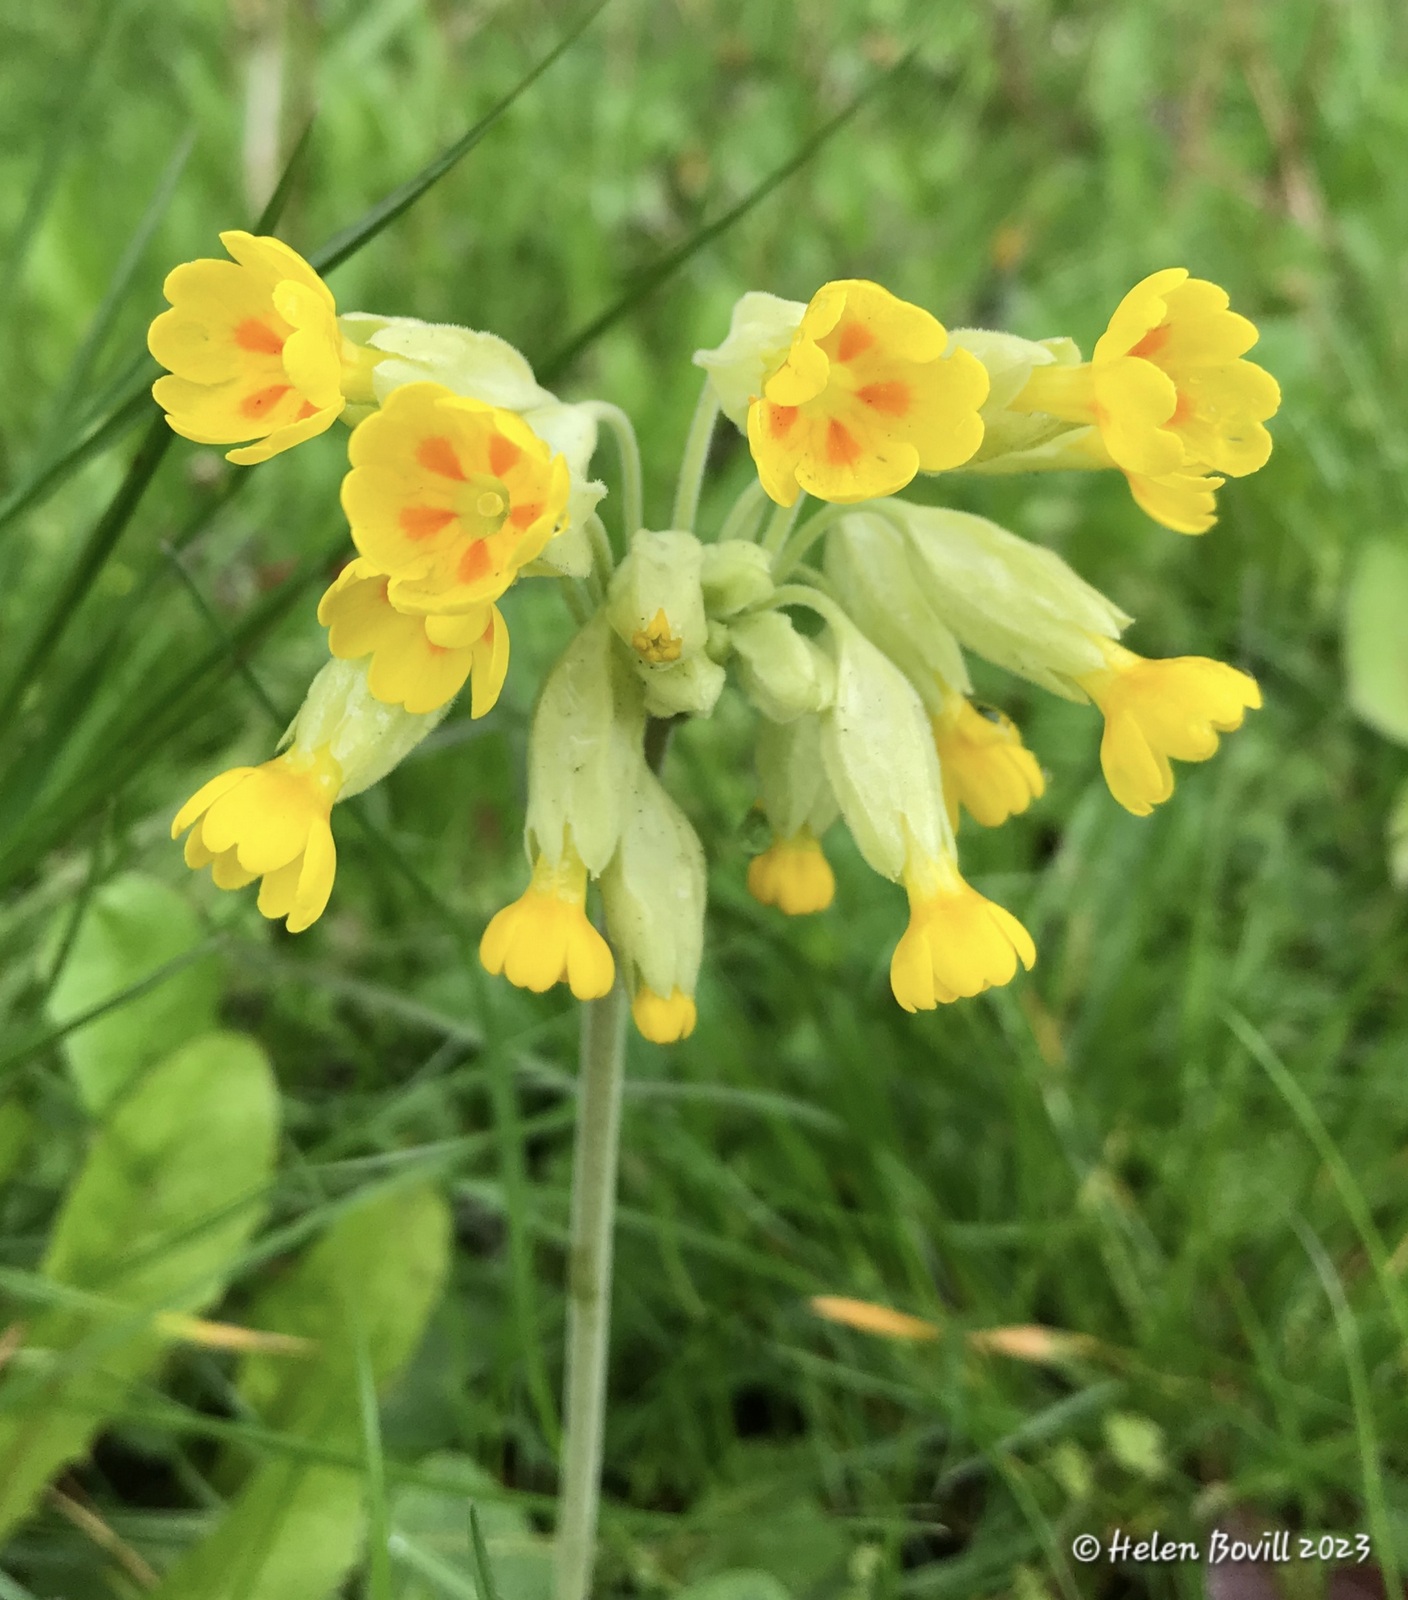 Cowslips growing in the grass verge alongside the cemetery